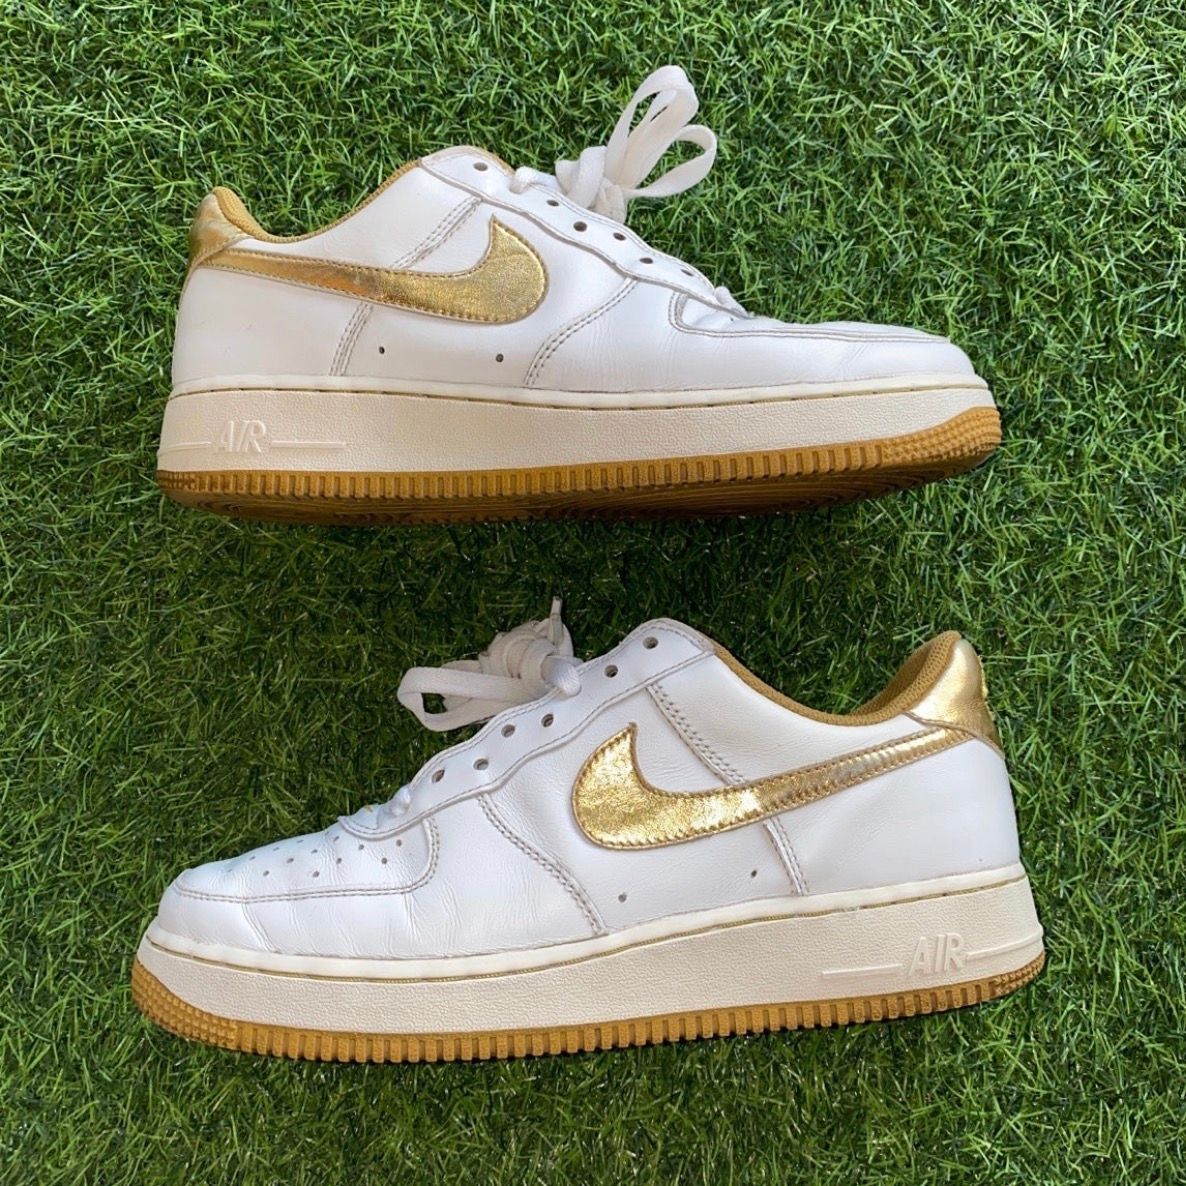 Nike Nike Airforces 1 Wmns 2010 released shoes No Box no insole Size US 11 / IT 41 - 1 Preview